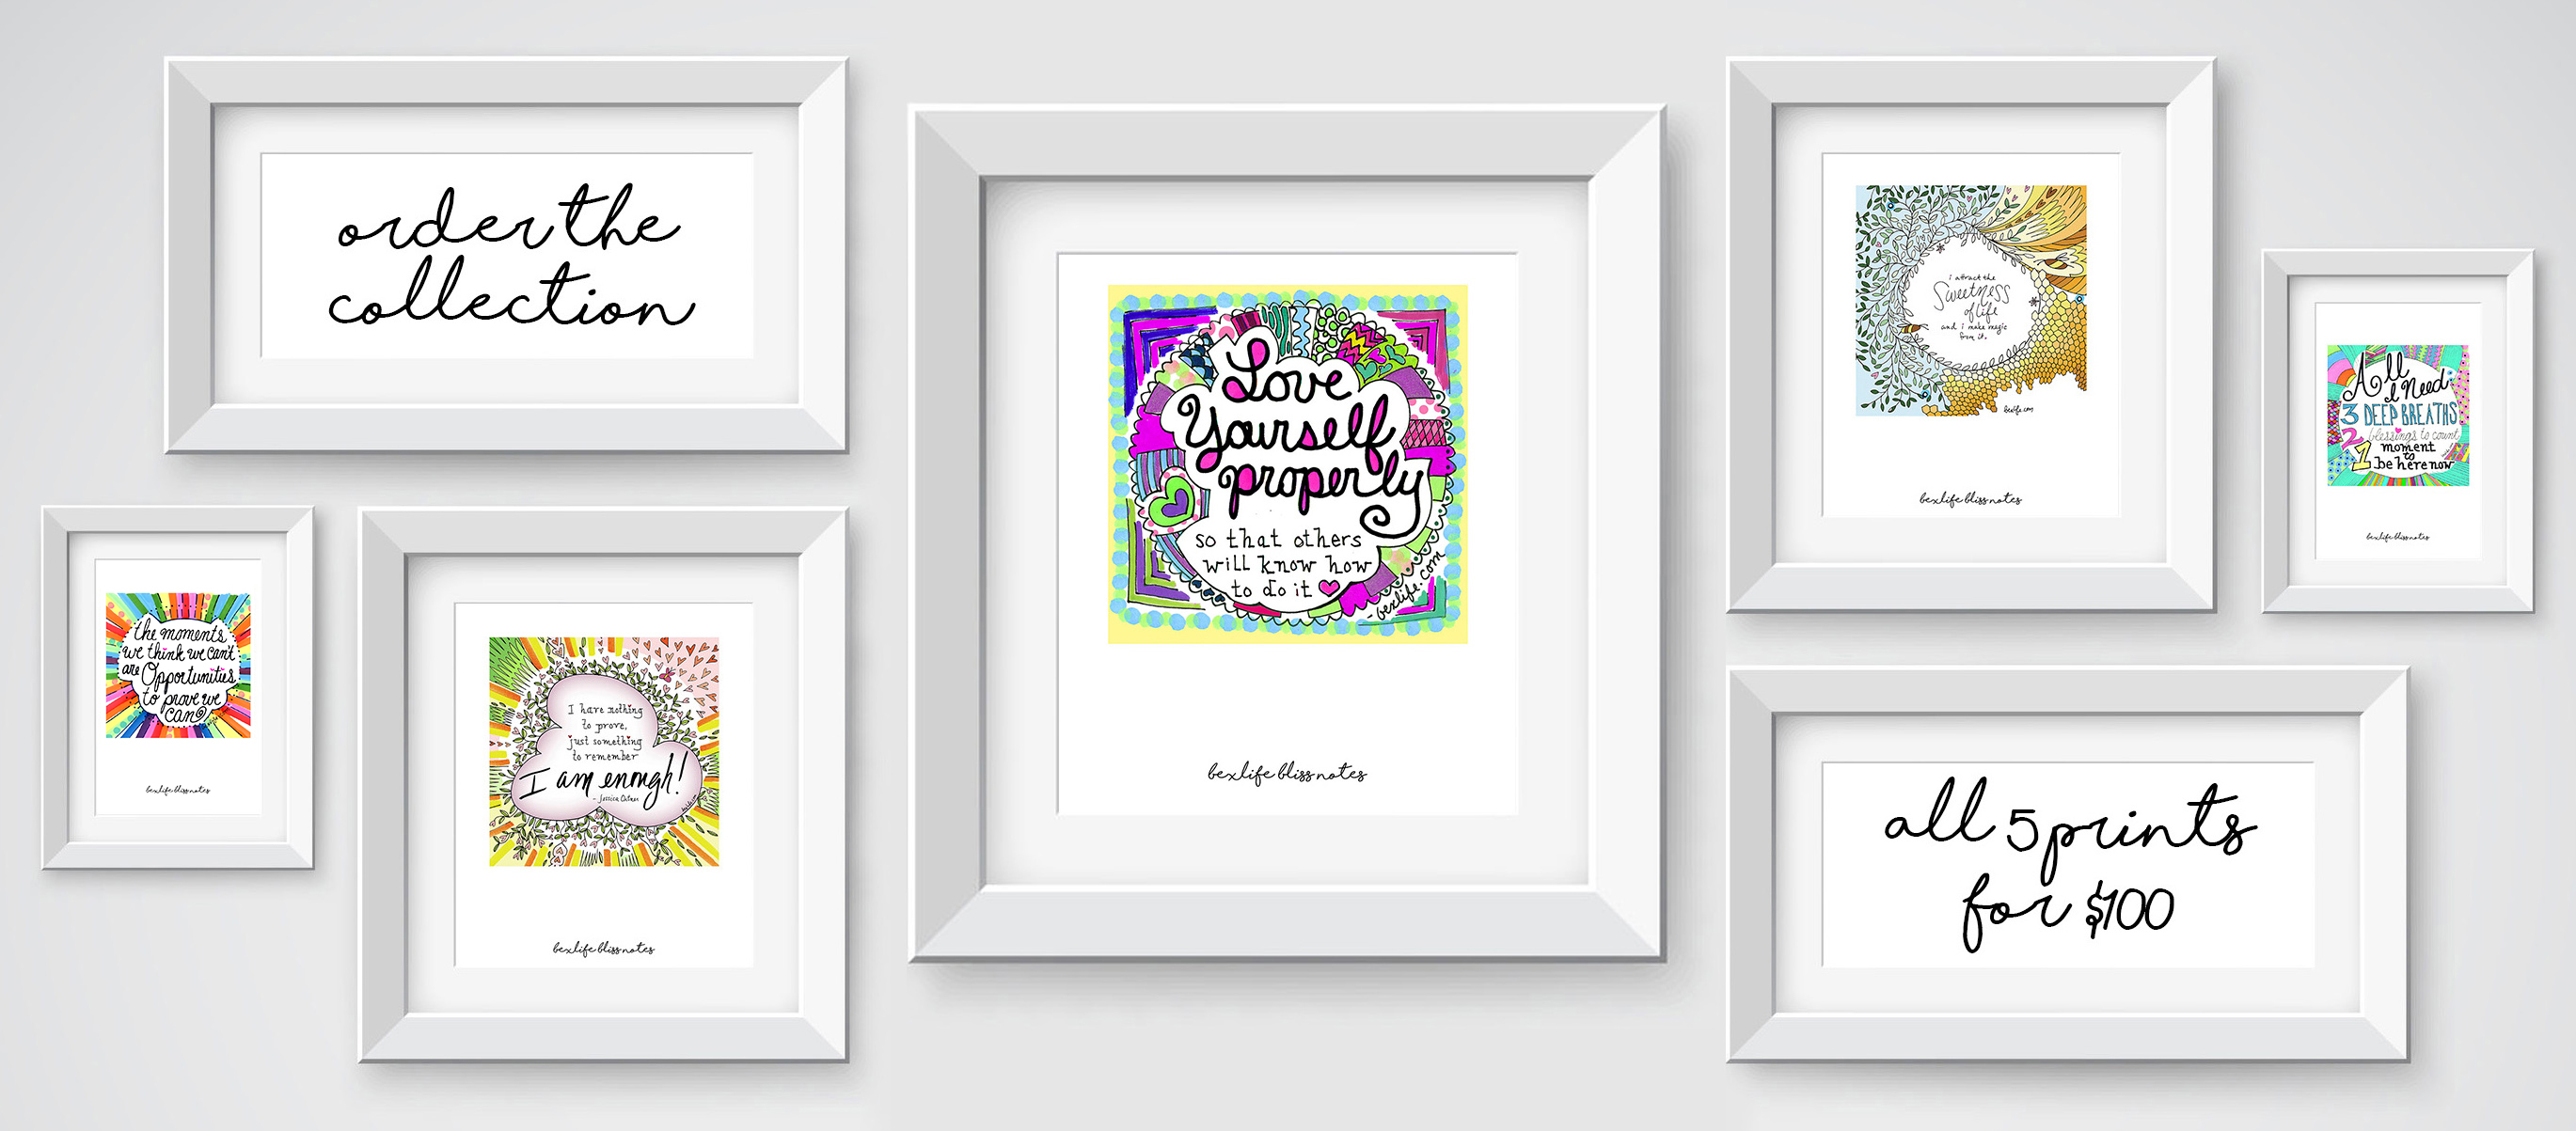 BexLife Bliss Notes Print Collection - Affirmation and Mantra Prints